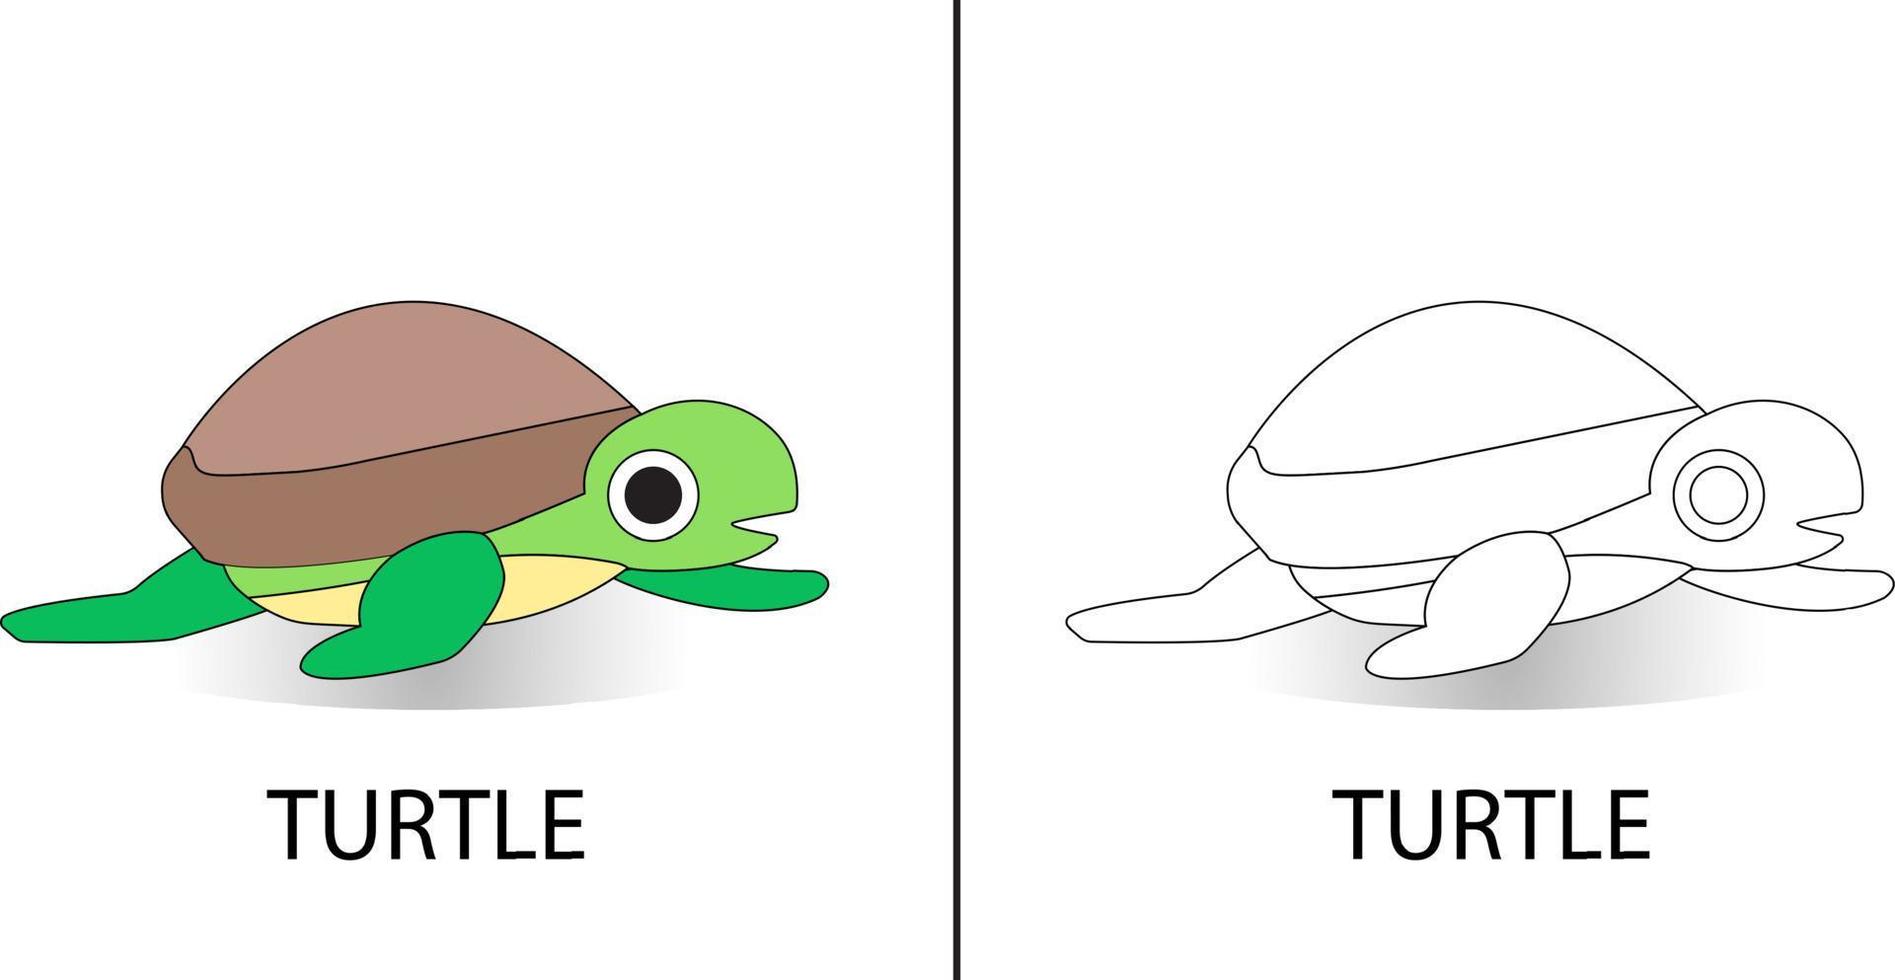 Turtle Cartoon Vector Illustration. Tortoise Mascot Logo. Kids Coloring Images Animal. Kids Drawing Icon Character